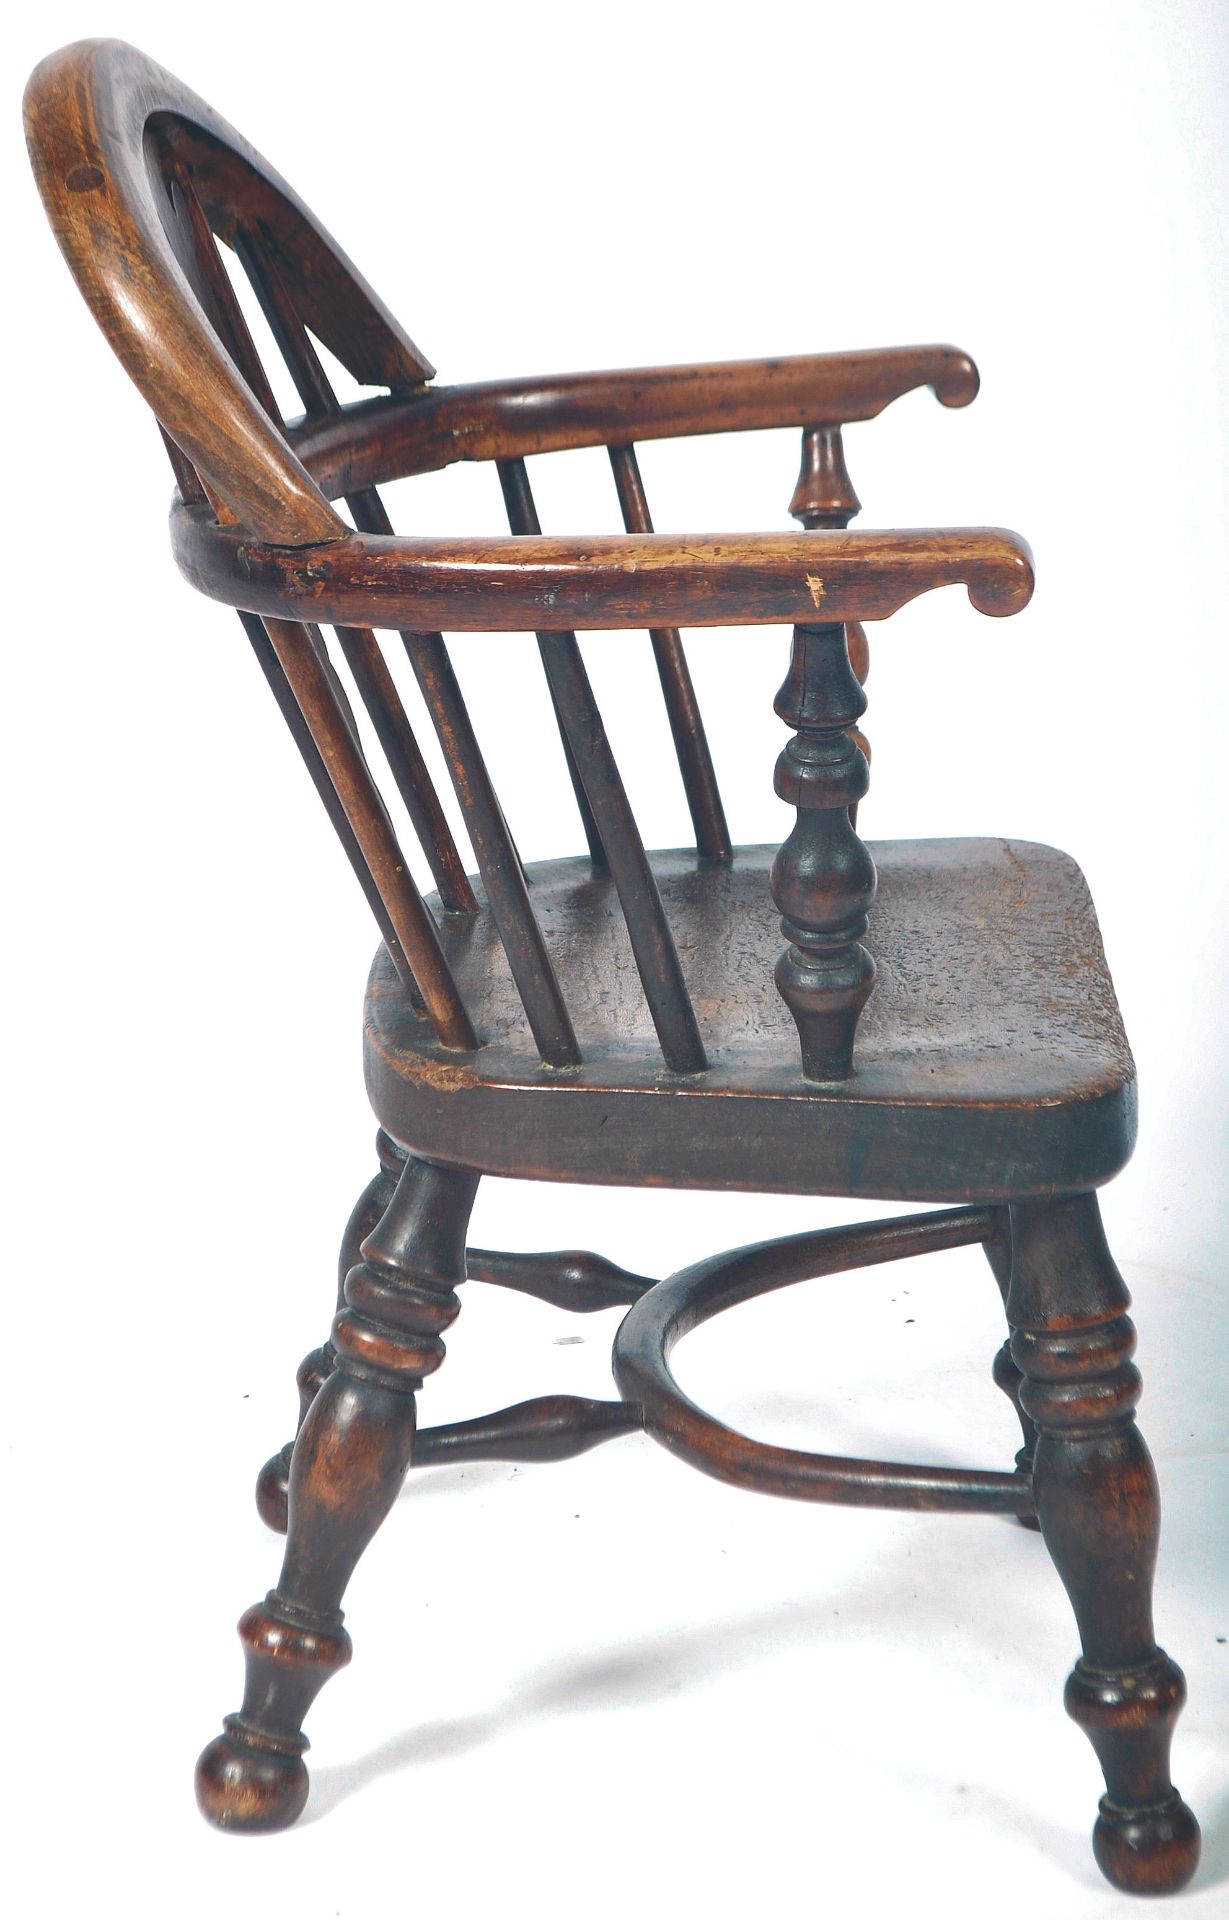 RARE ANTIQUE COUNTRY HOUSE YEW AND ELM CHILDS WINDSOR CHAIR - Image 6 of 8